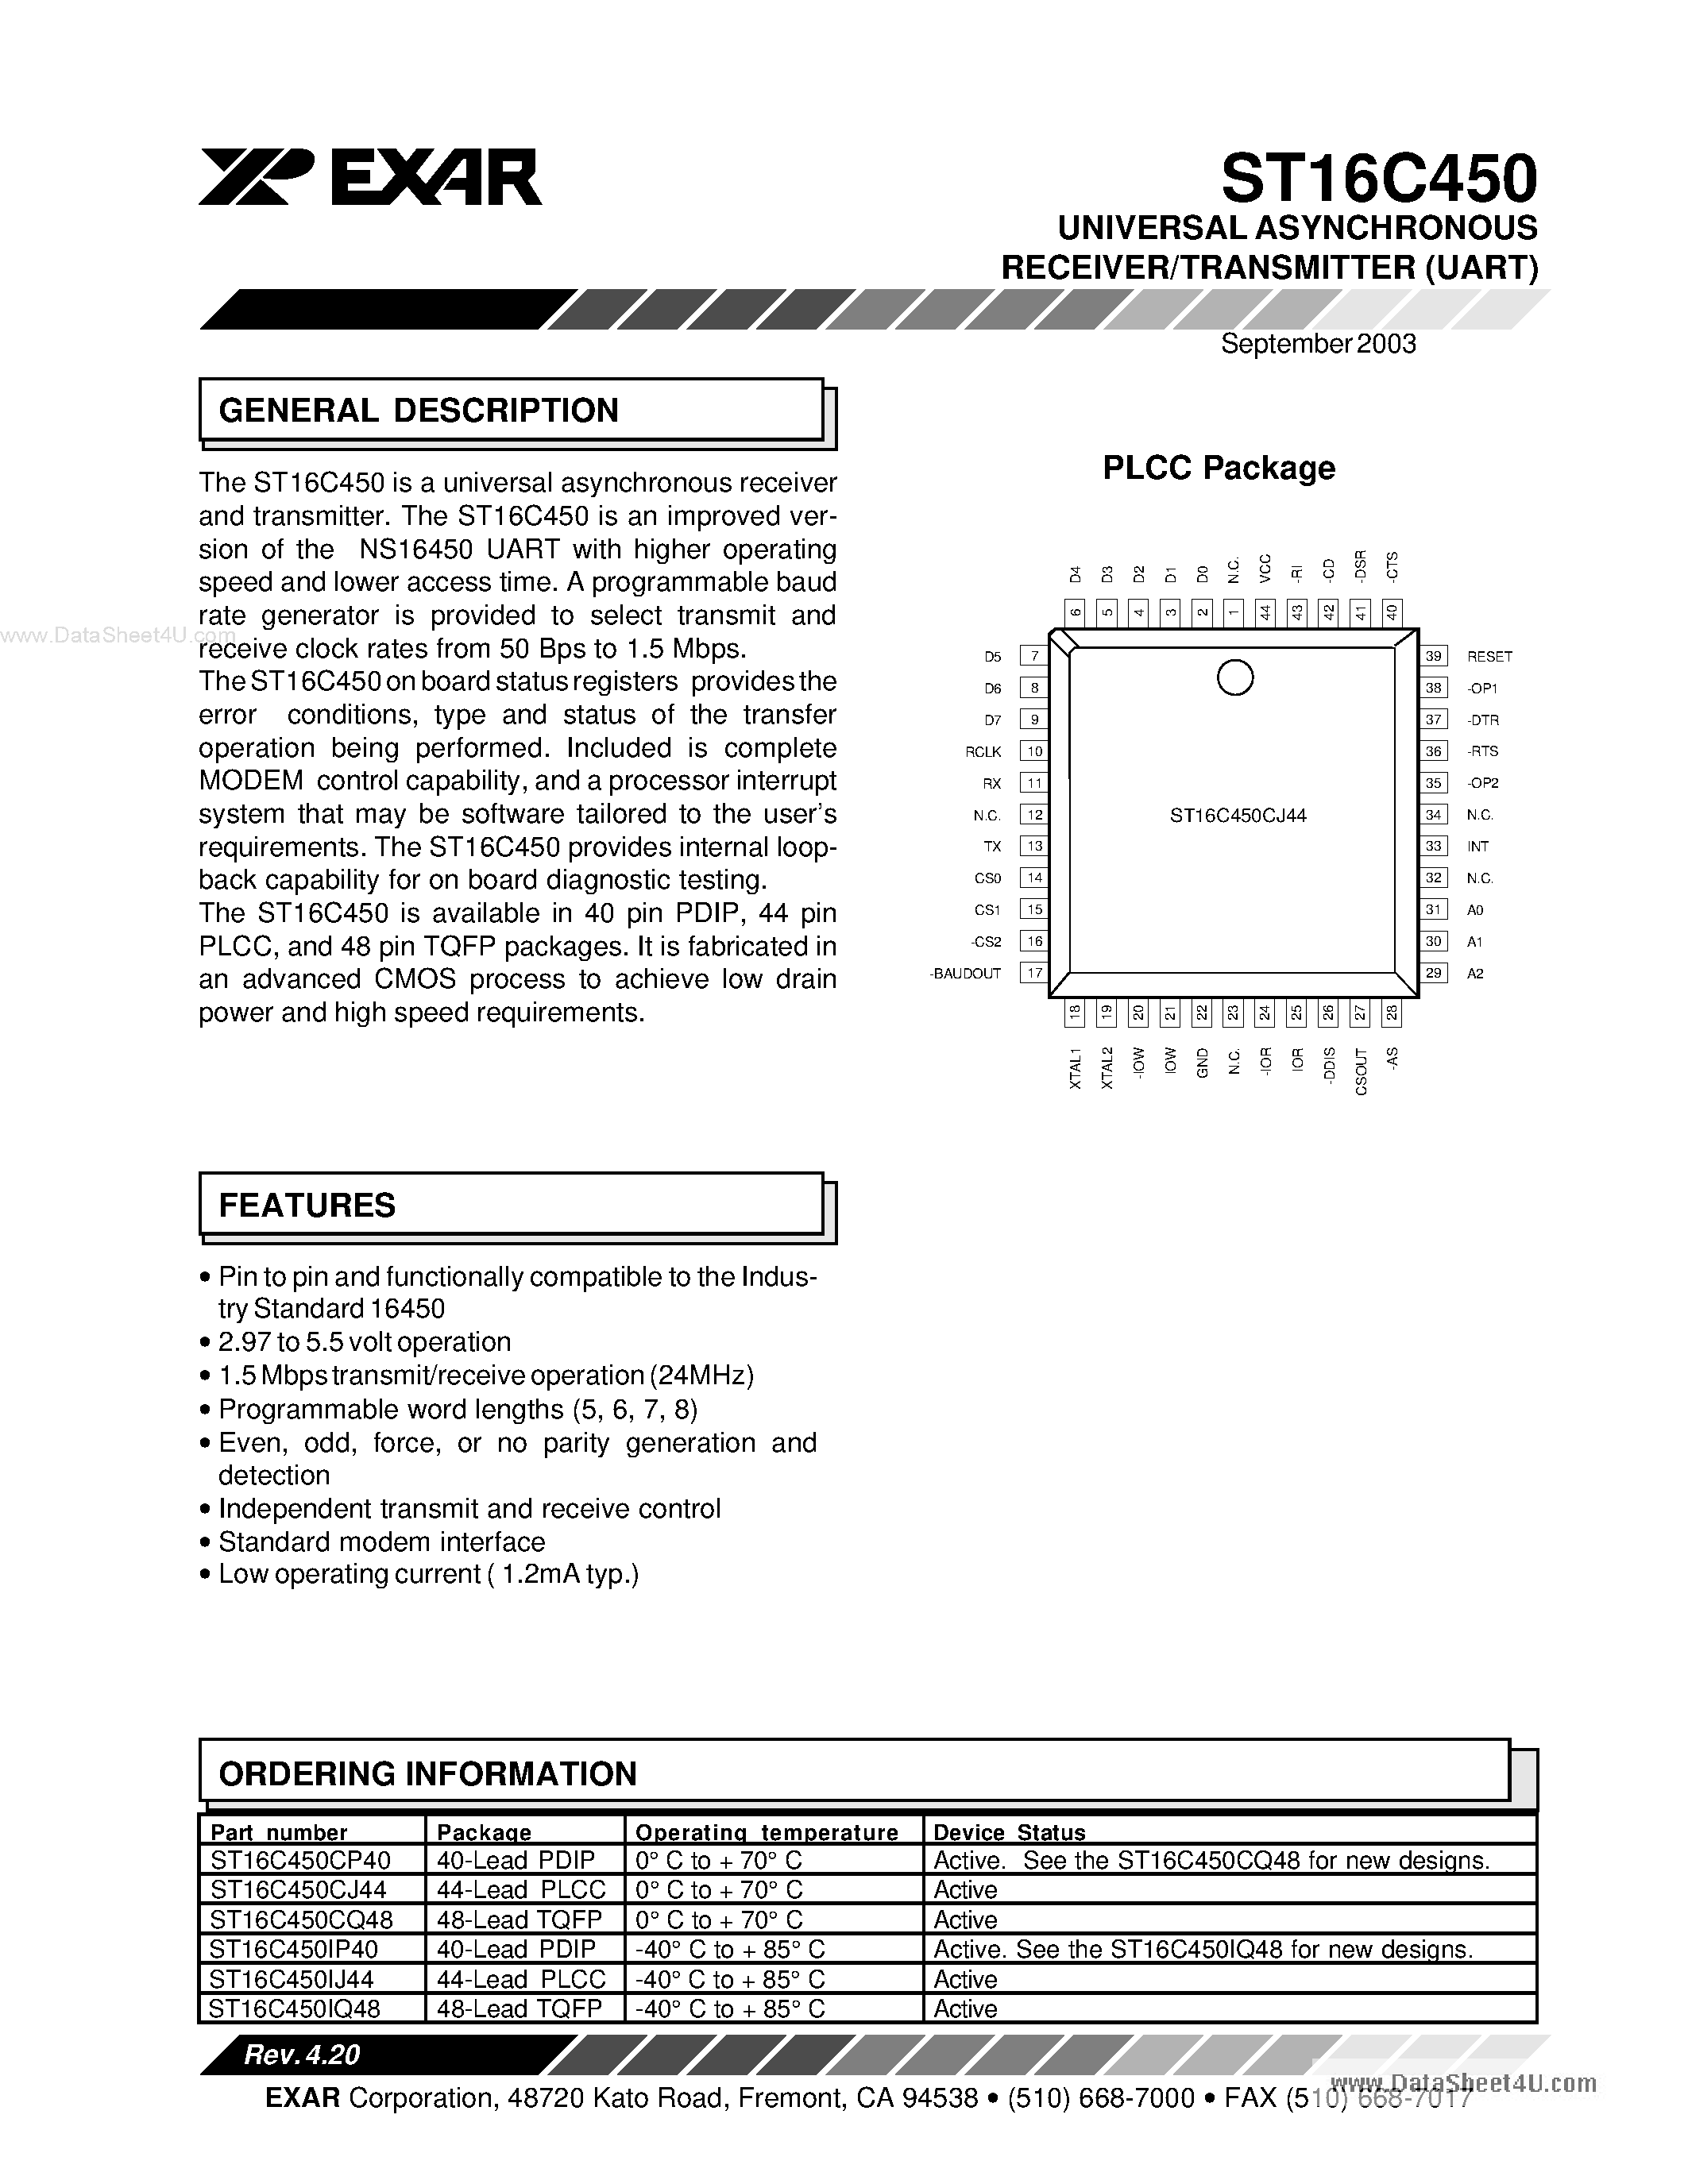 Datasheet 16C450 - Search ---> ST16C450 page 1